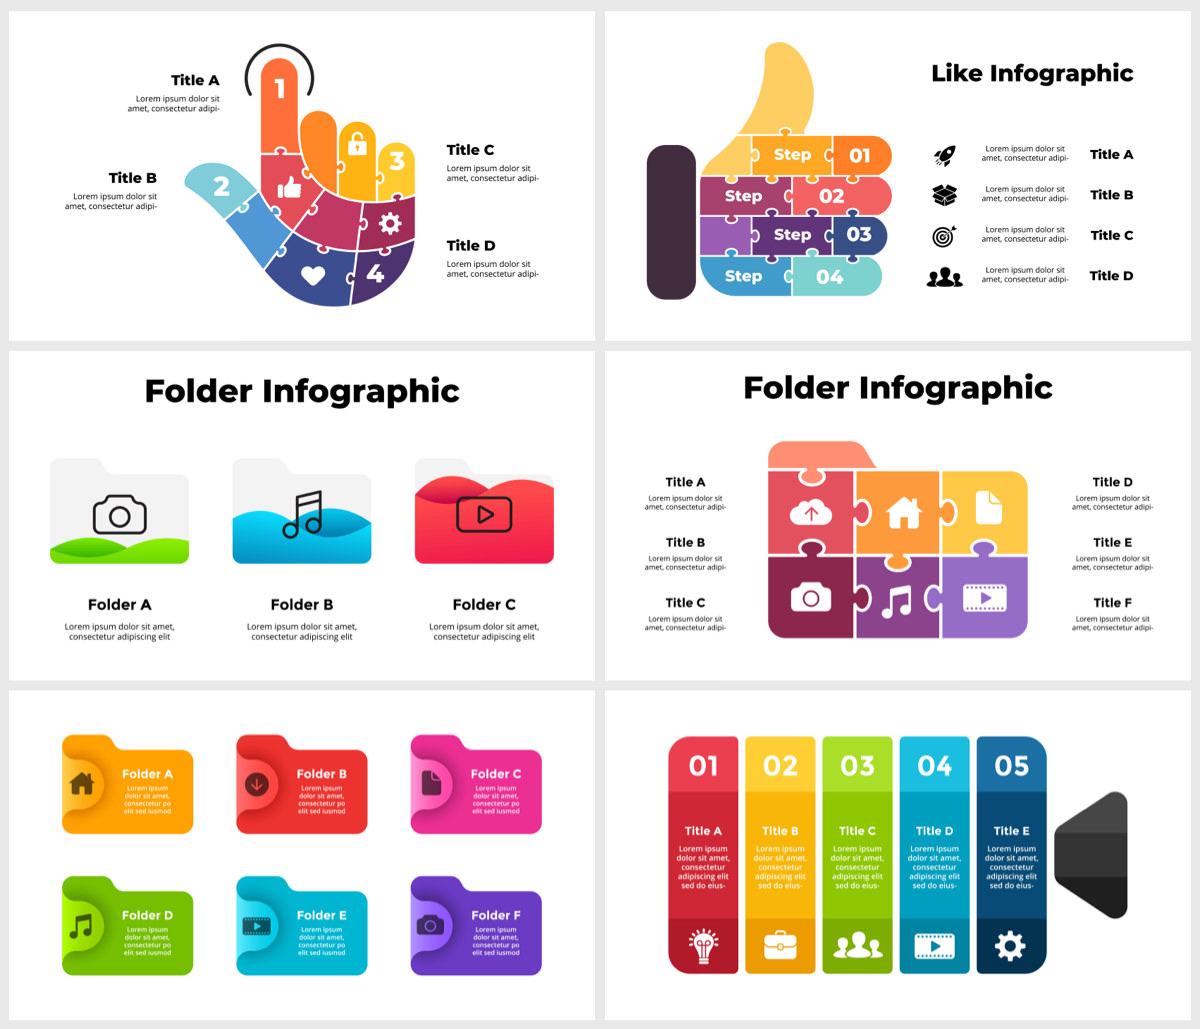 Wowly - 3500 Infographics & Presentation Templates! Updated! PowerPoint Canva Figma Sketch Ai Psd. - 213